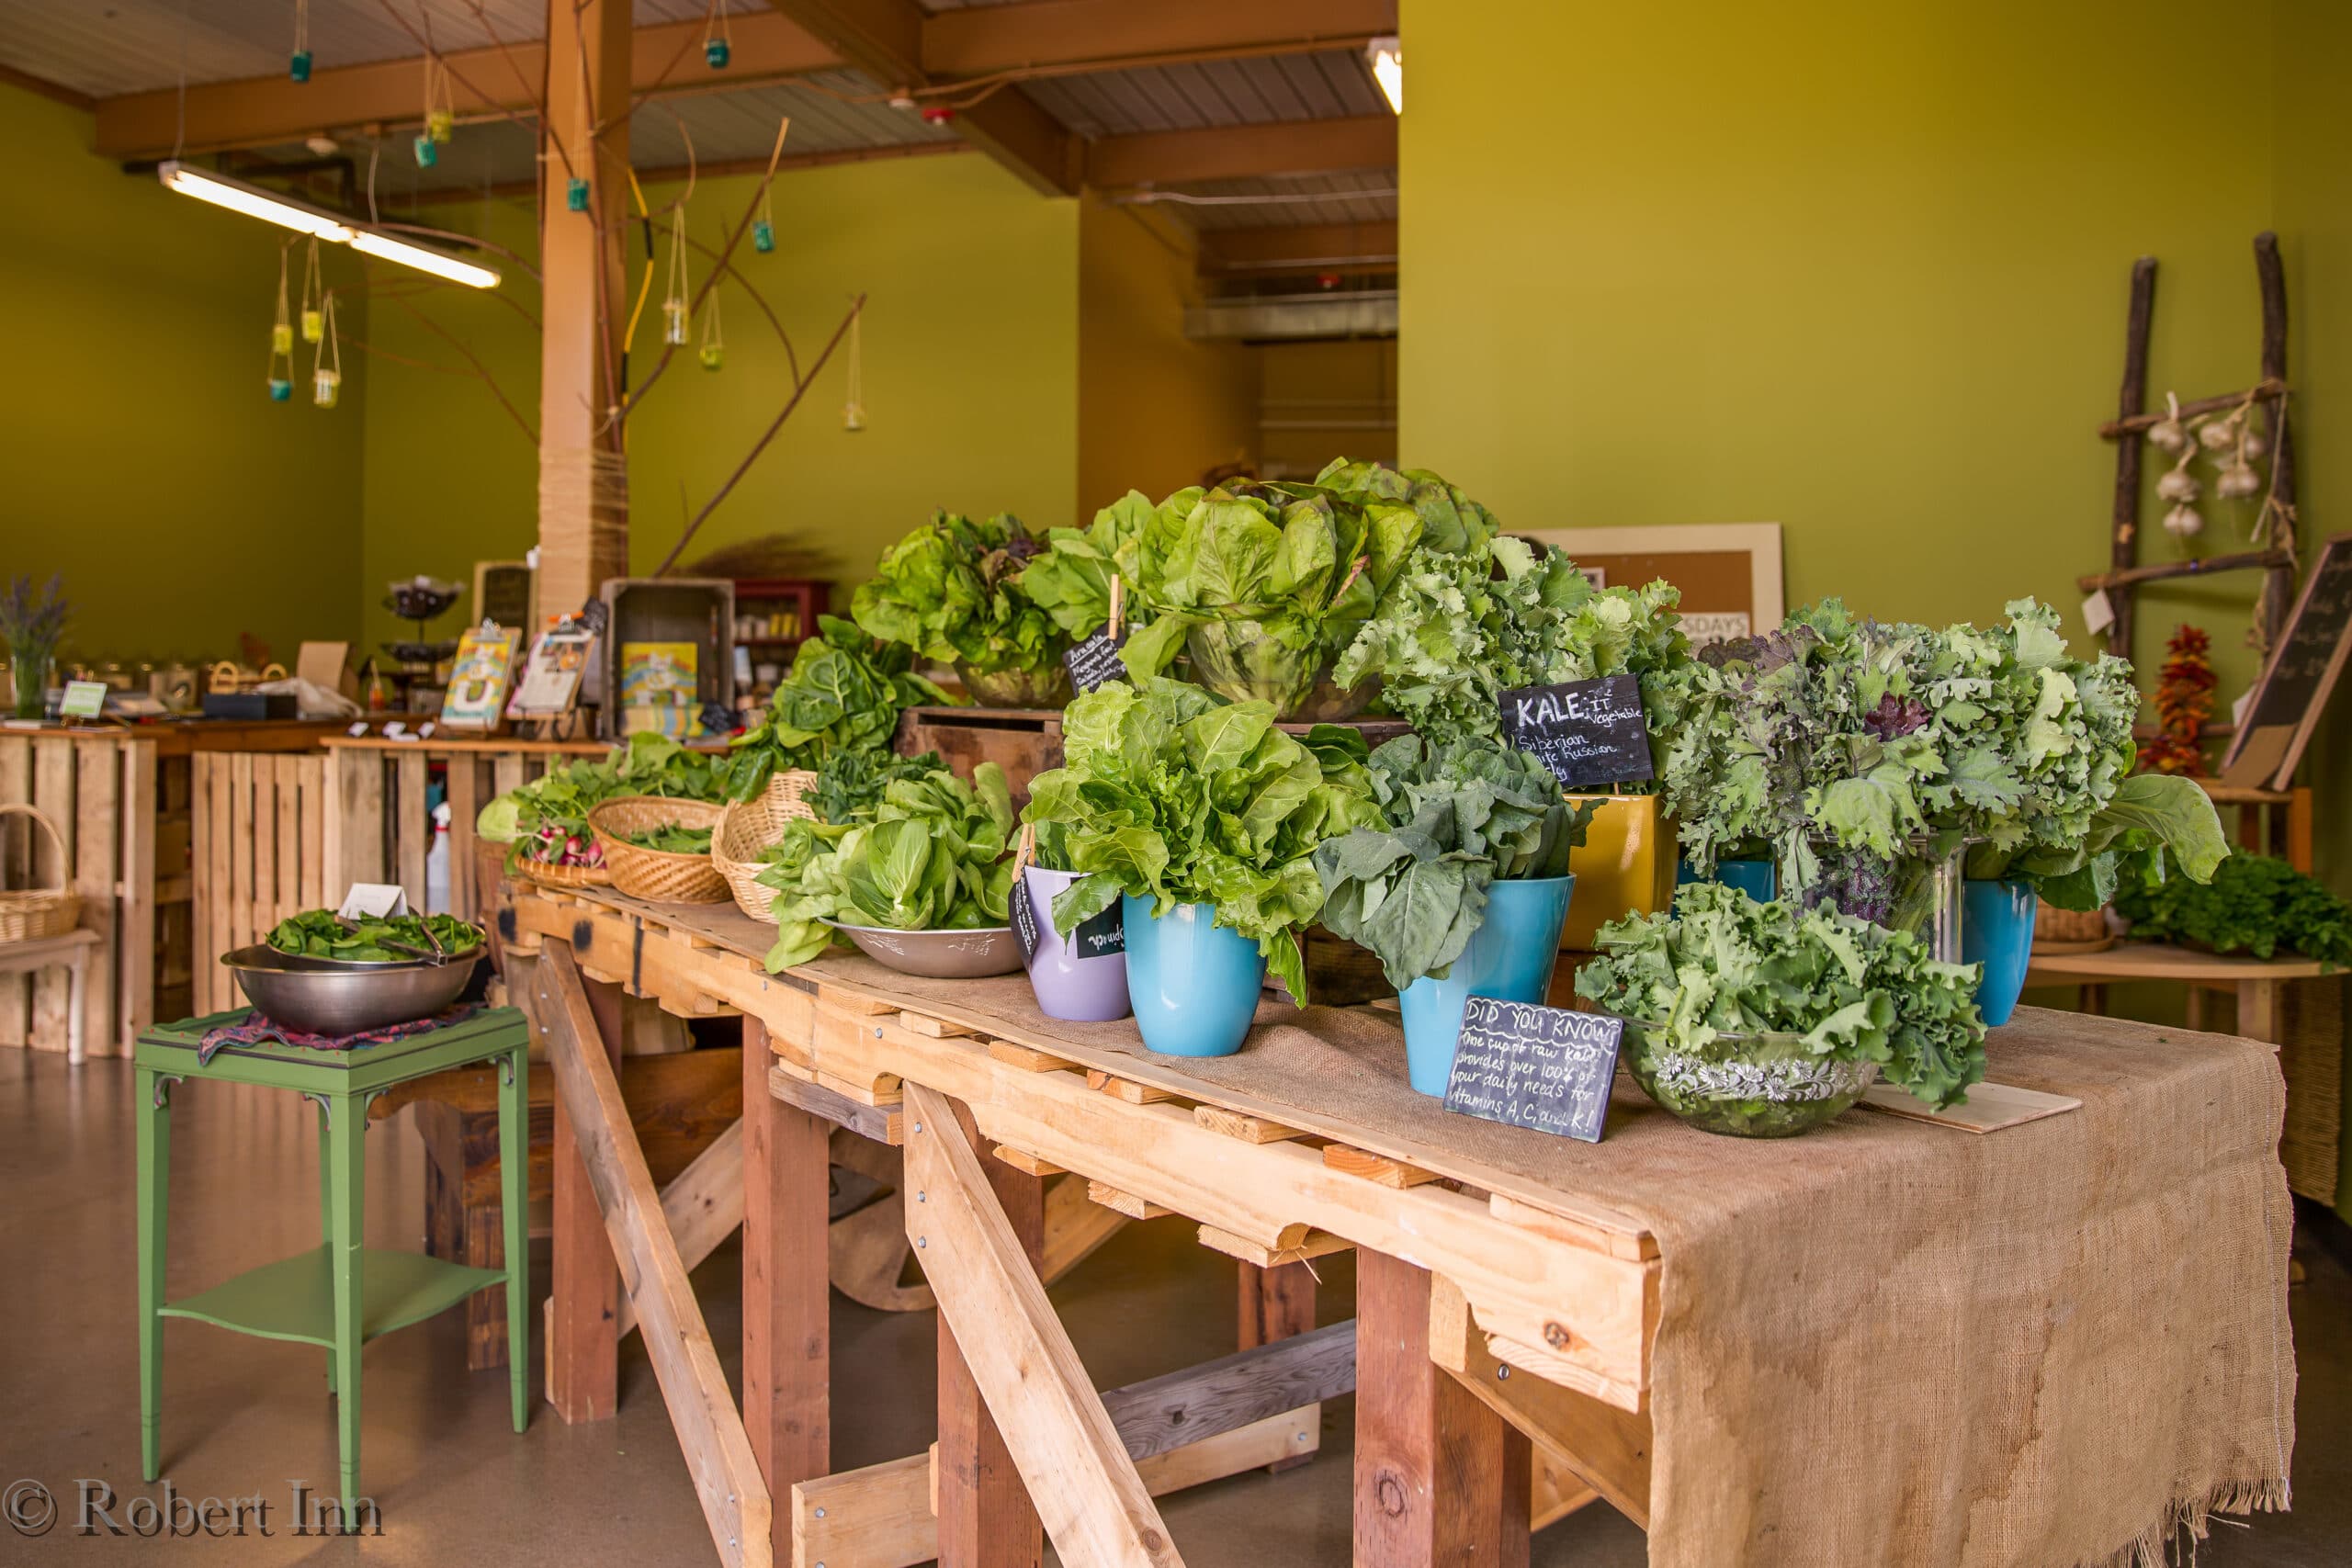 Thanks to Robert Inn Photography for this beautiful photo of the greens from our farm in the 21 Acres Market.